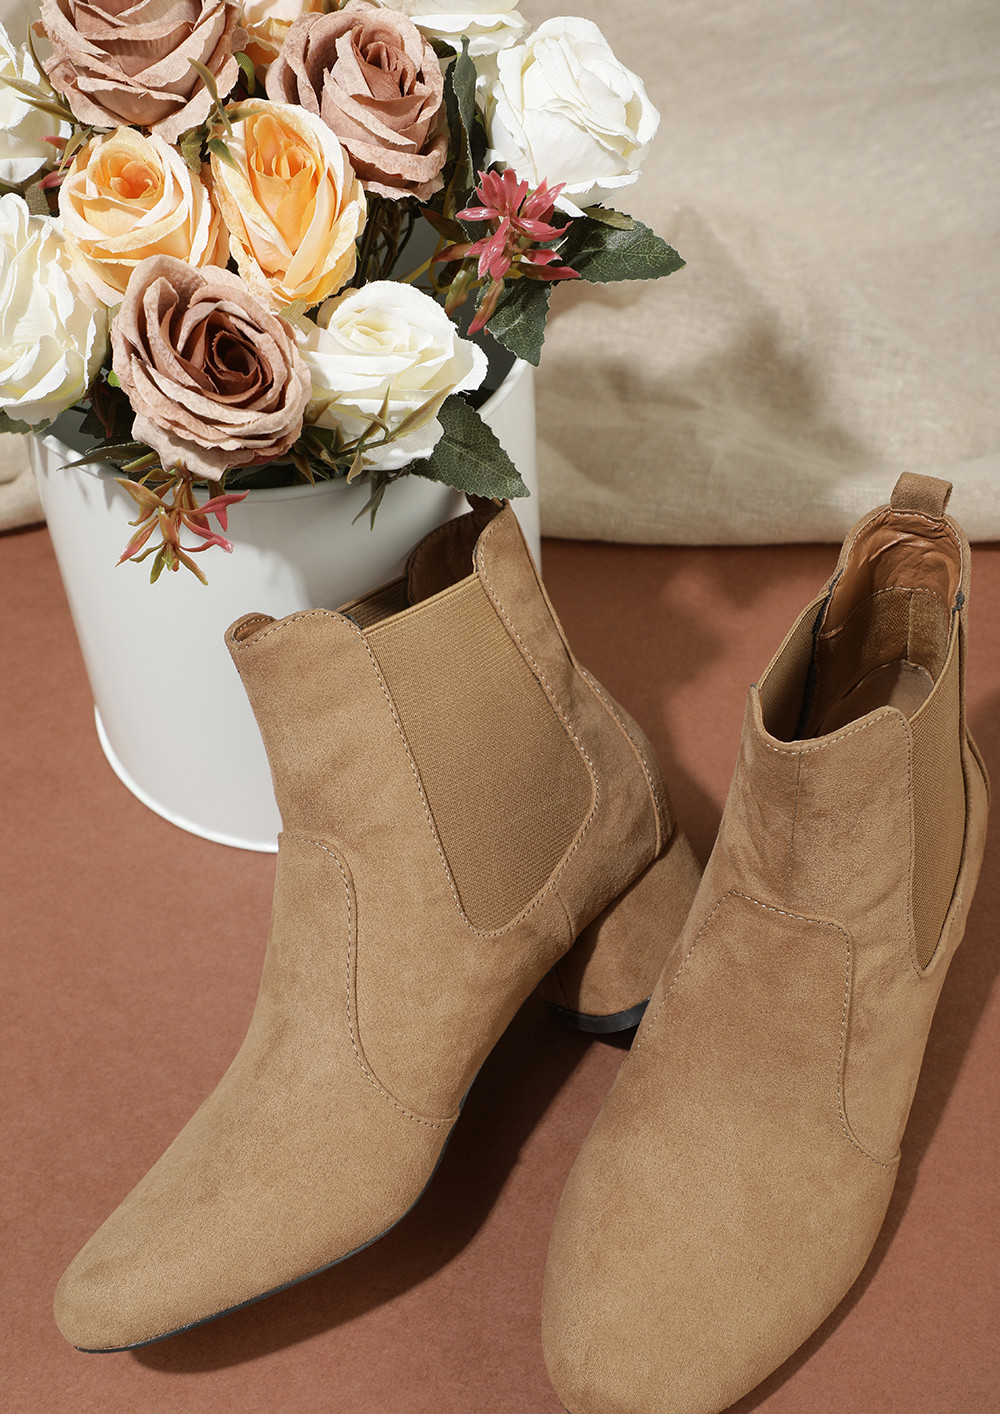 Keeping It Real Low-key Khaki Ankle Boots